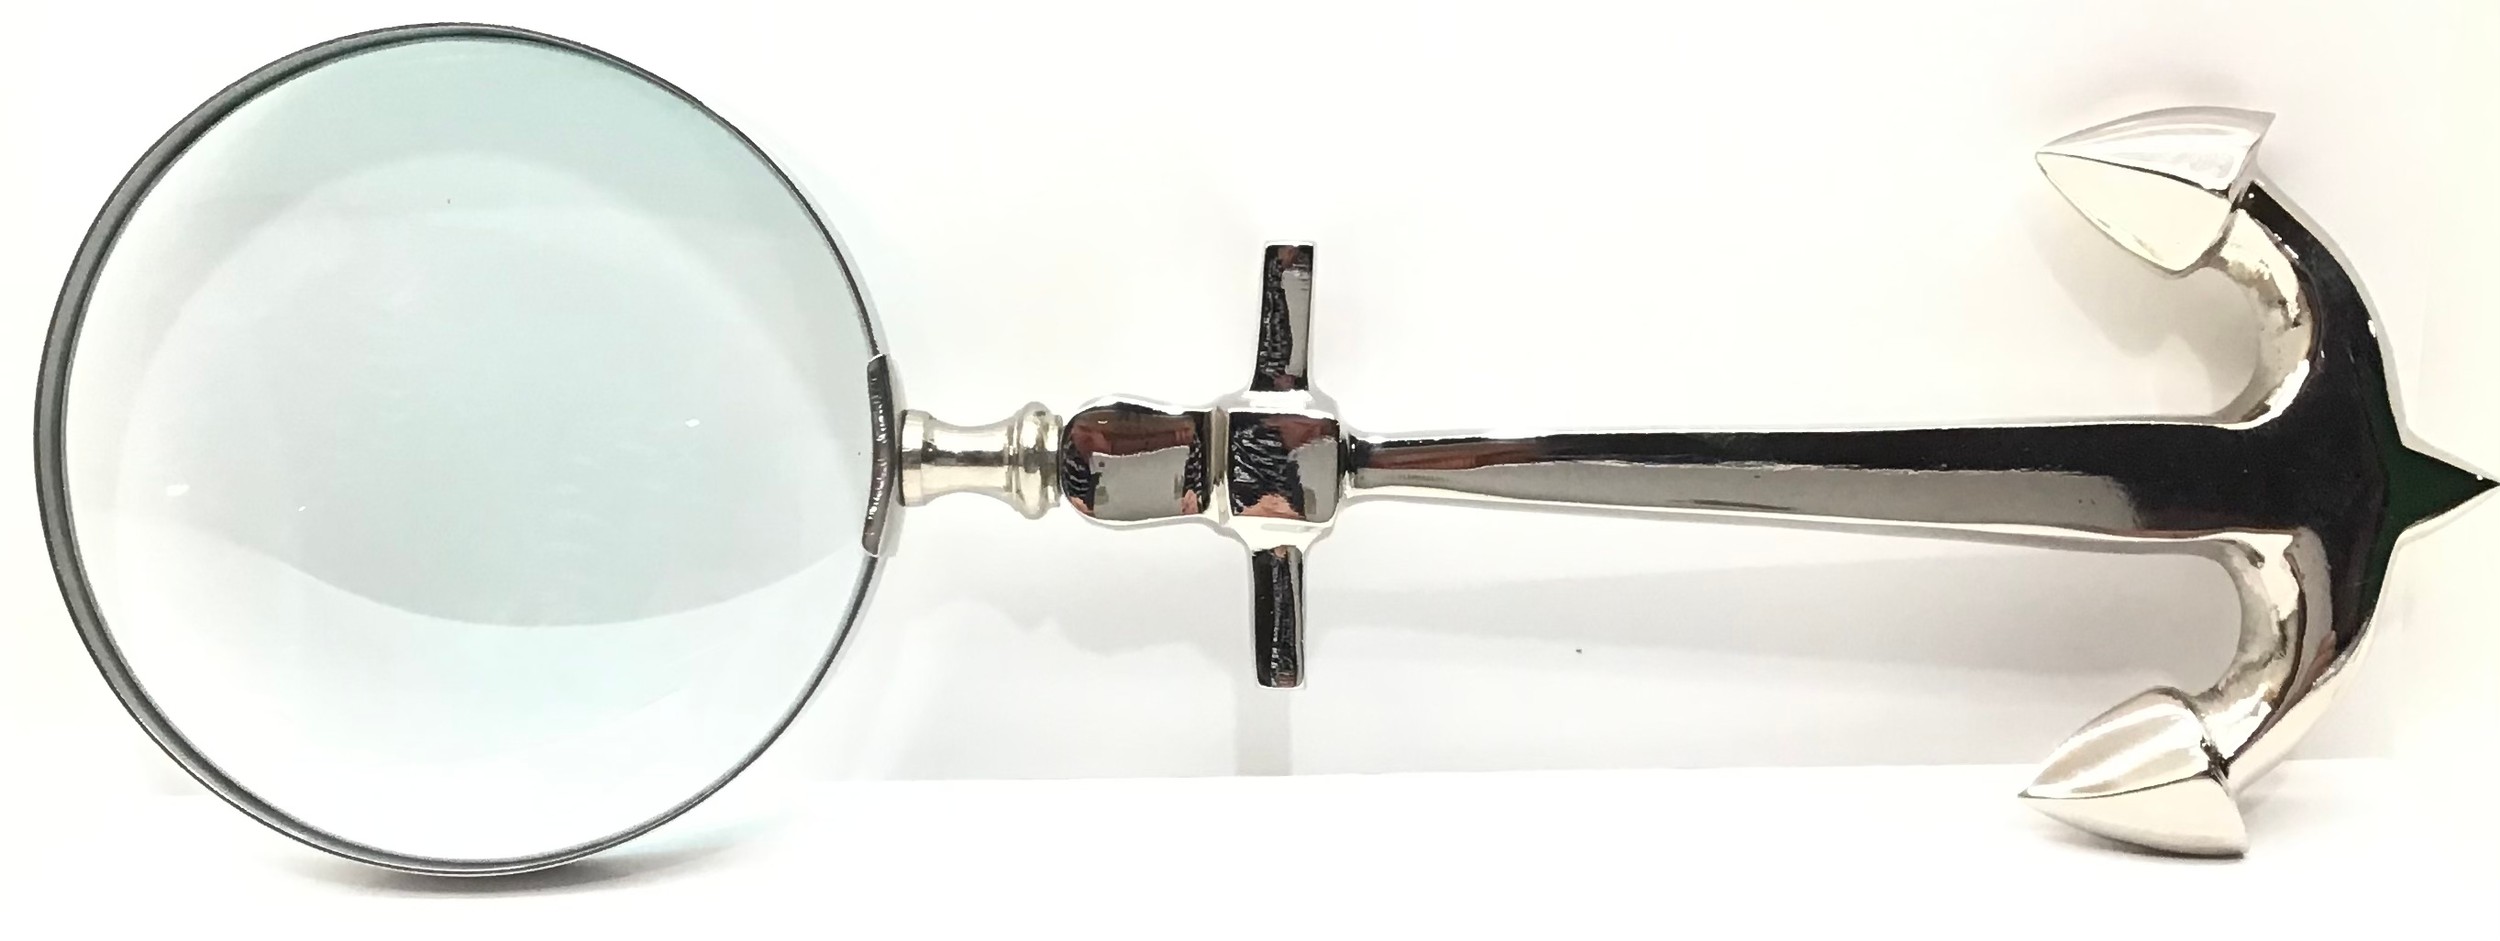 A large anchor shaped magnifying glass.